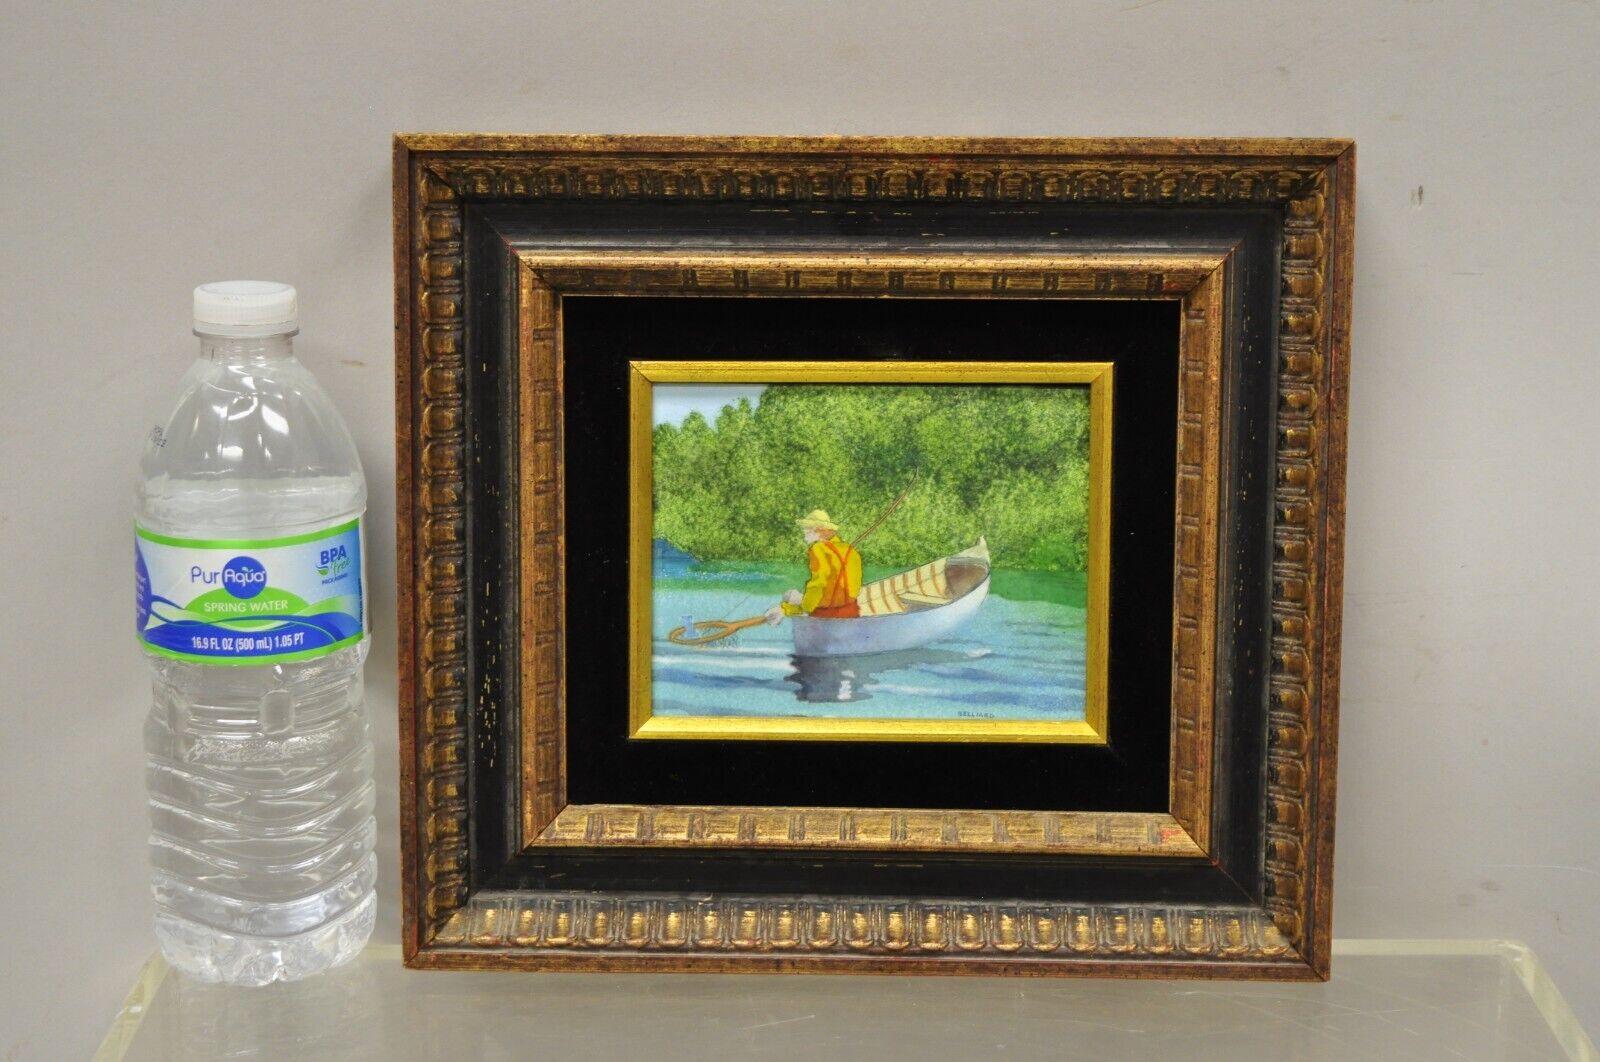 Daniel Belliard Enamel on copper small framed painting fisherman in boat on lake. Item features an enamel on copper painting, distressed wooden frame, artist signature to bottom right corner, beautiful subject and color. Circa Late 20th